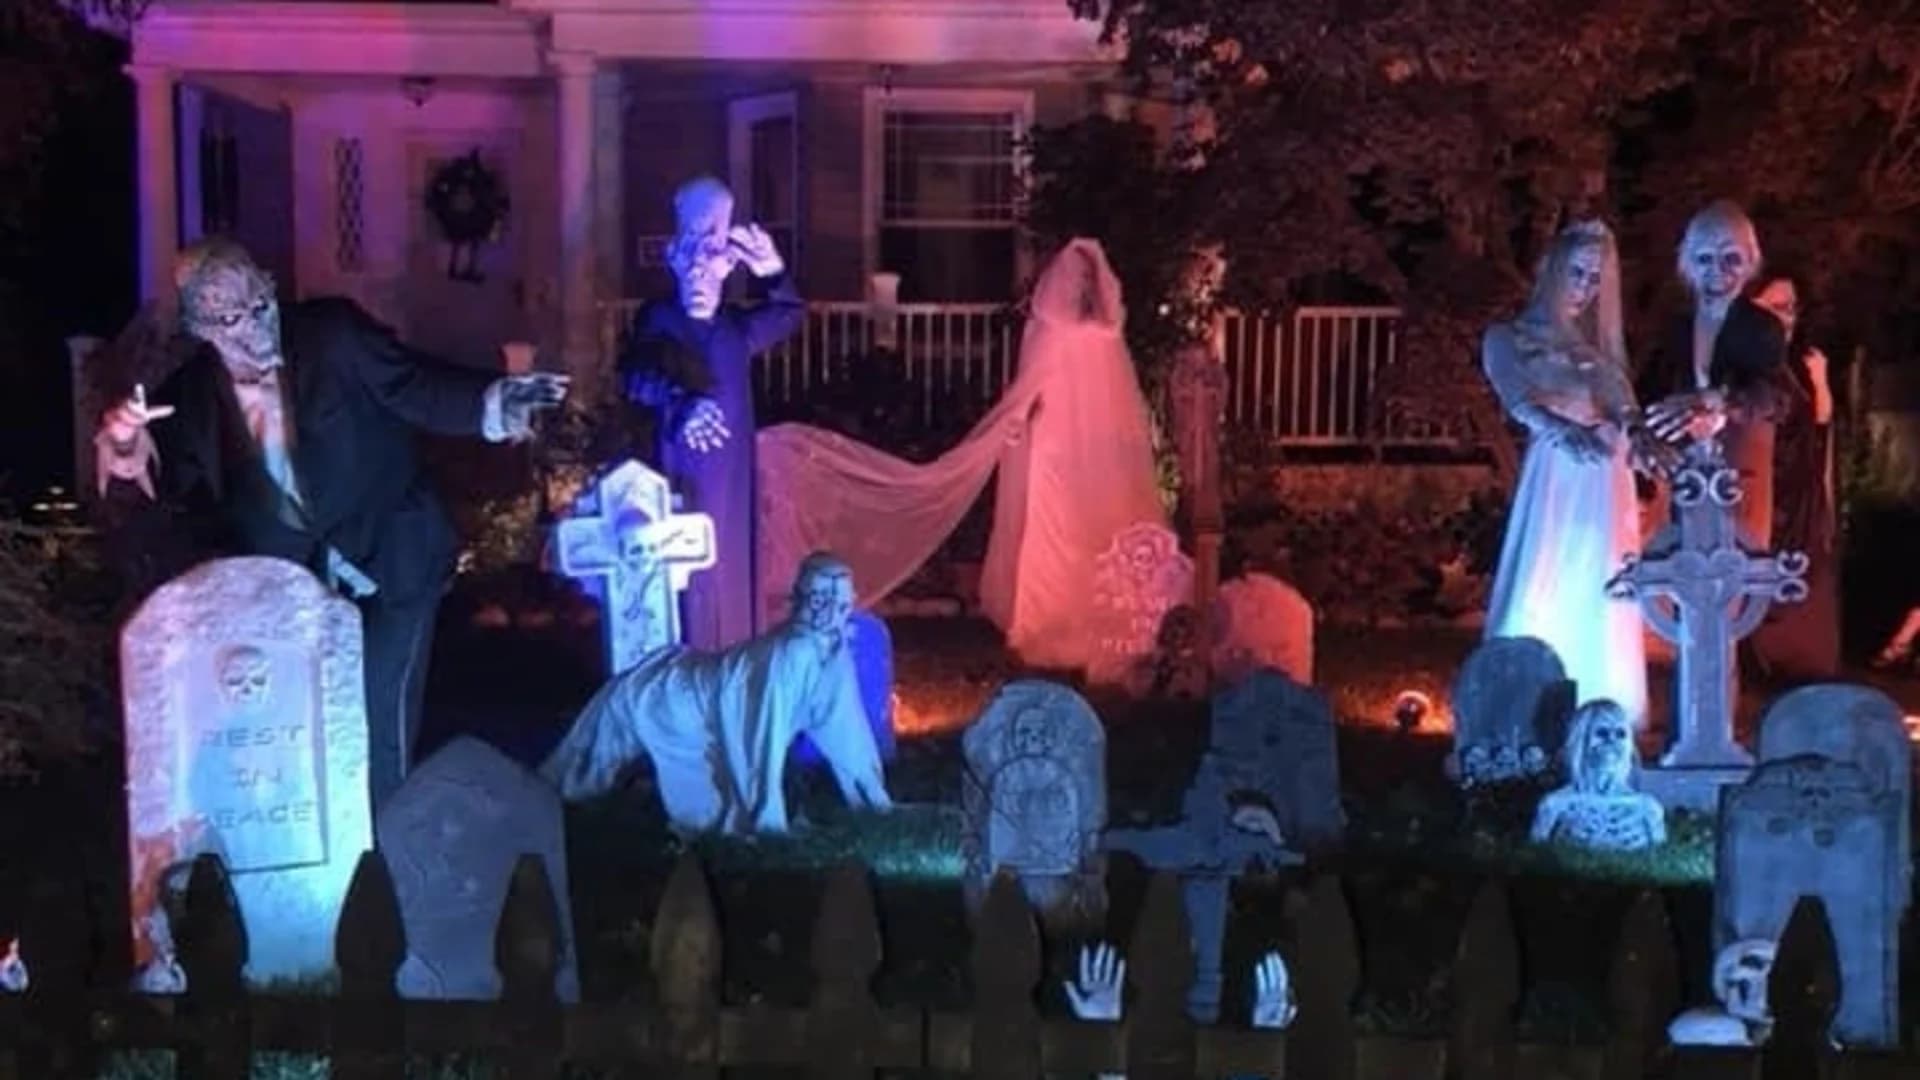 New Jersey Homes Decked Out for Halloween